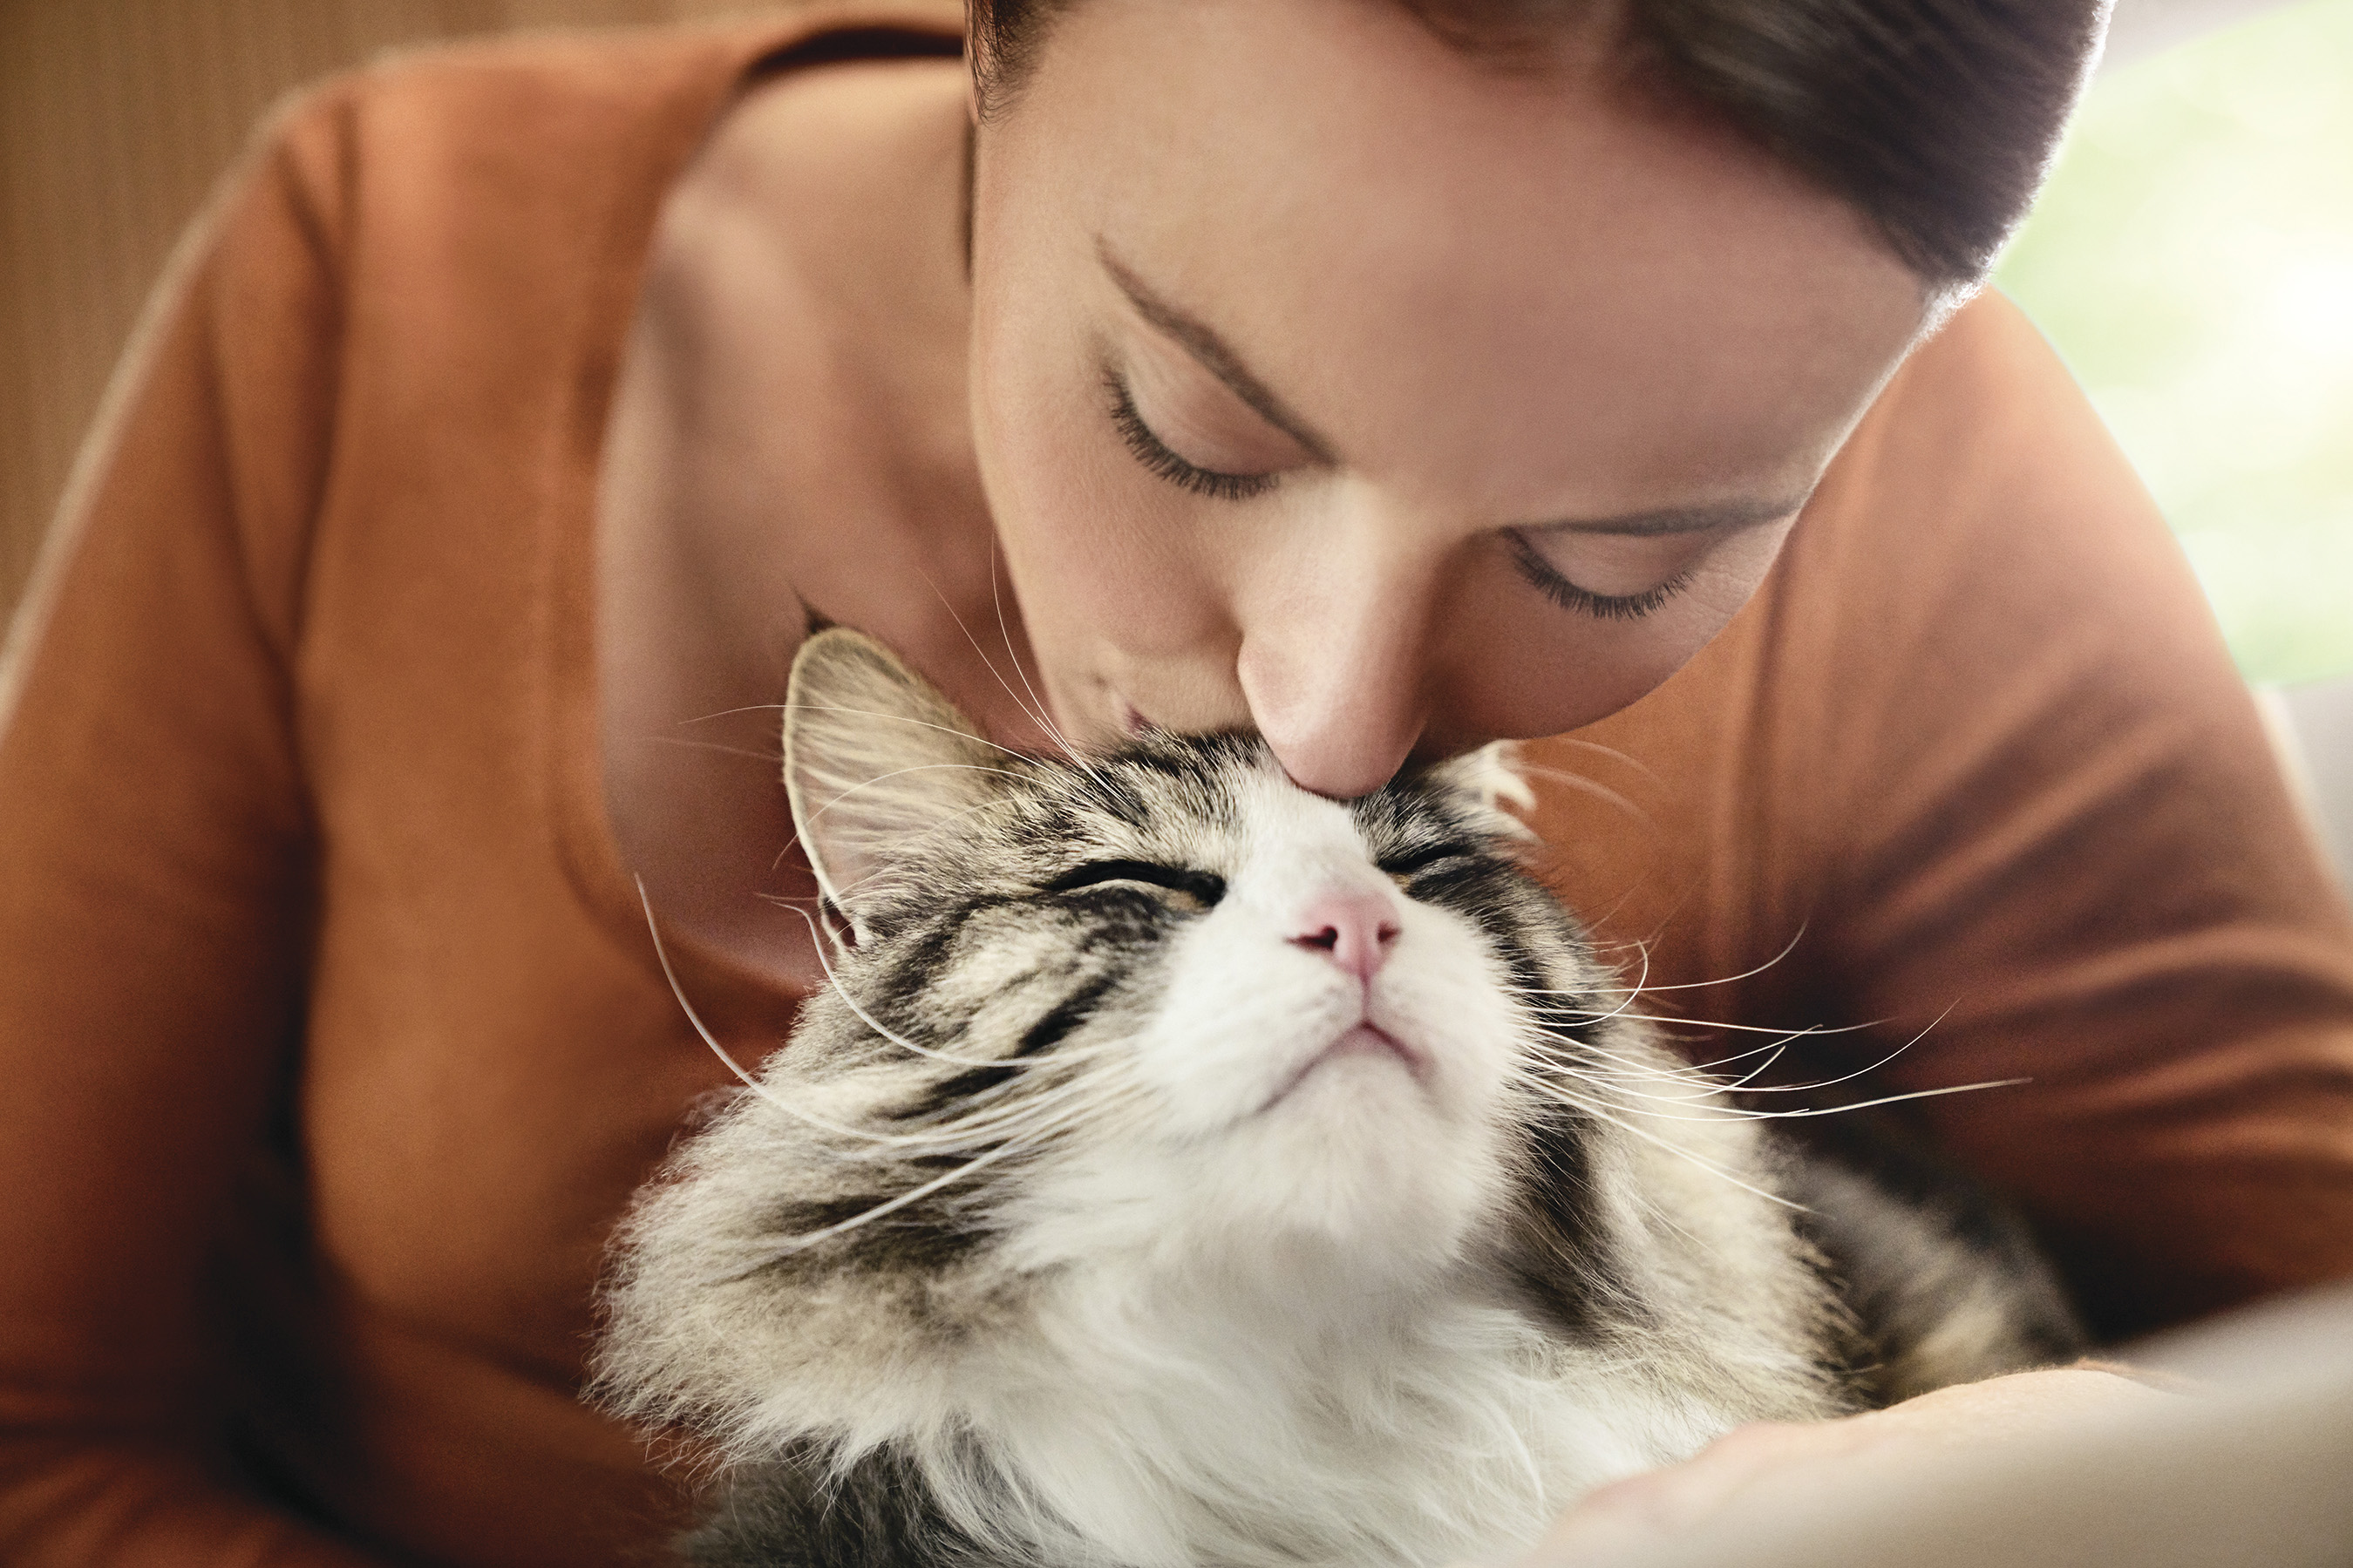 The bond that owners share with their cats is strong - a universal truth for all cat owners regardless of cat allergen sensitivities. A new survey from Purina Pro Plan in partnership with the Human Animal Bond Research Institute (HABRI), revealed that 84 percent of cat owners would dismiss the advice of a doctor if told to give up their cat to help manage cat allergens.